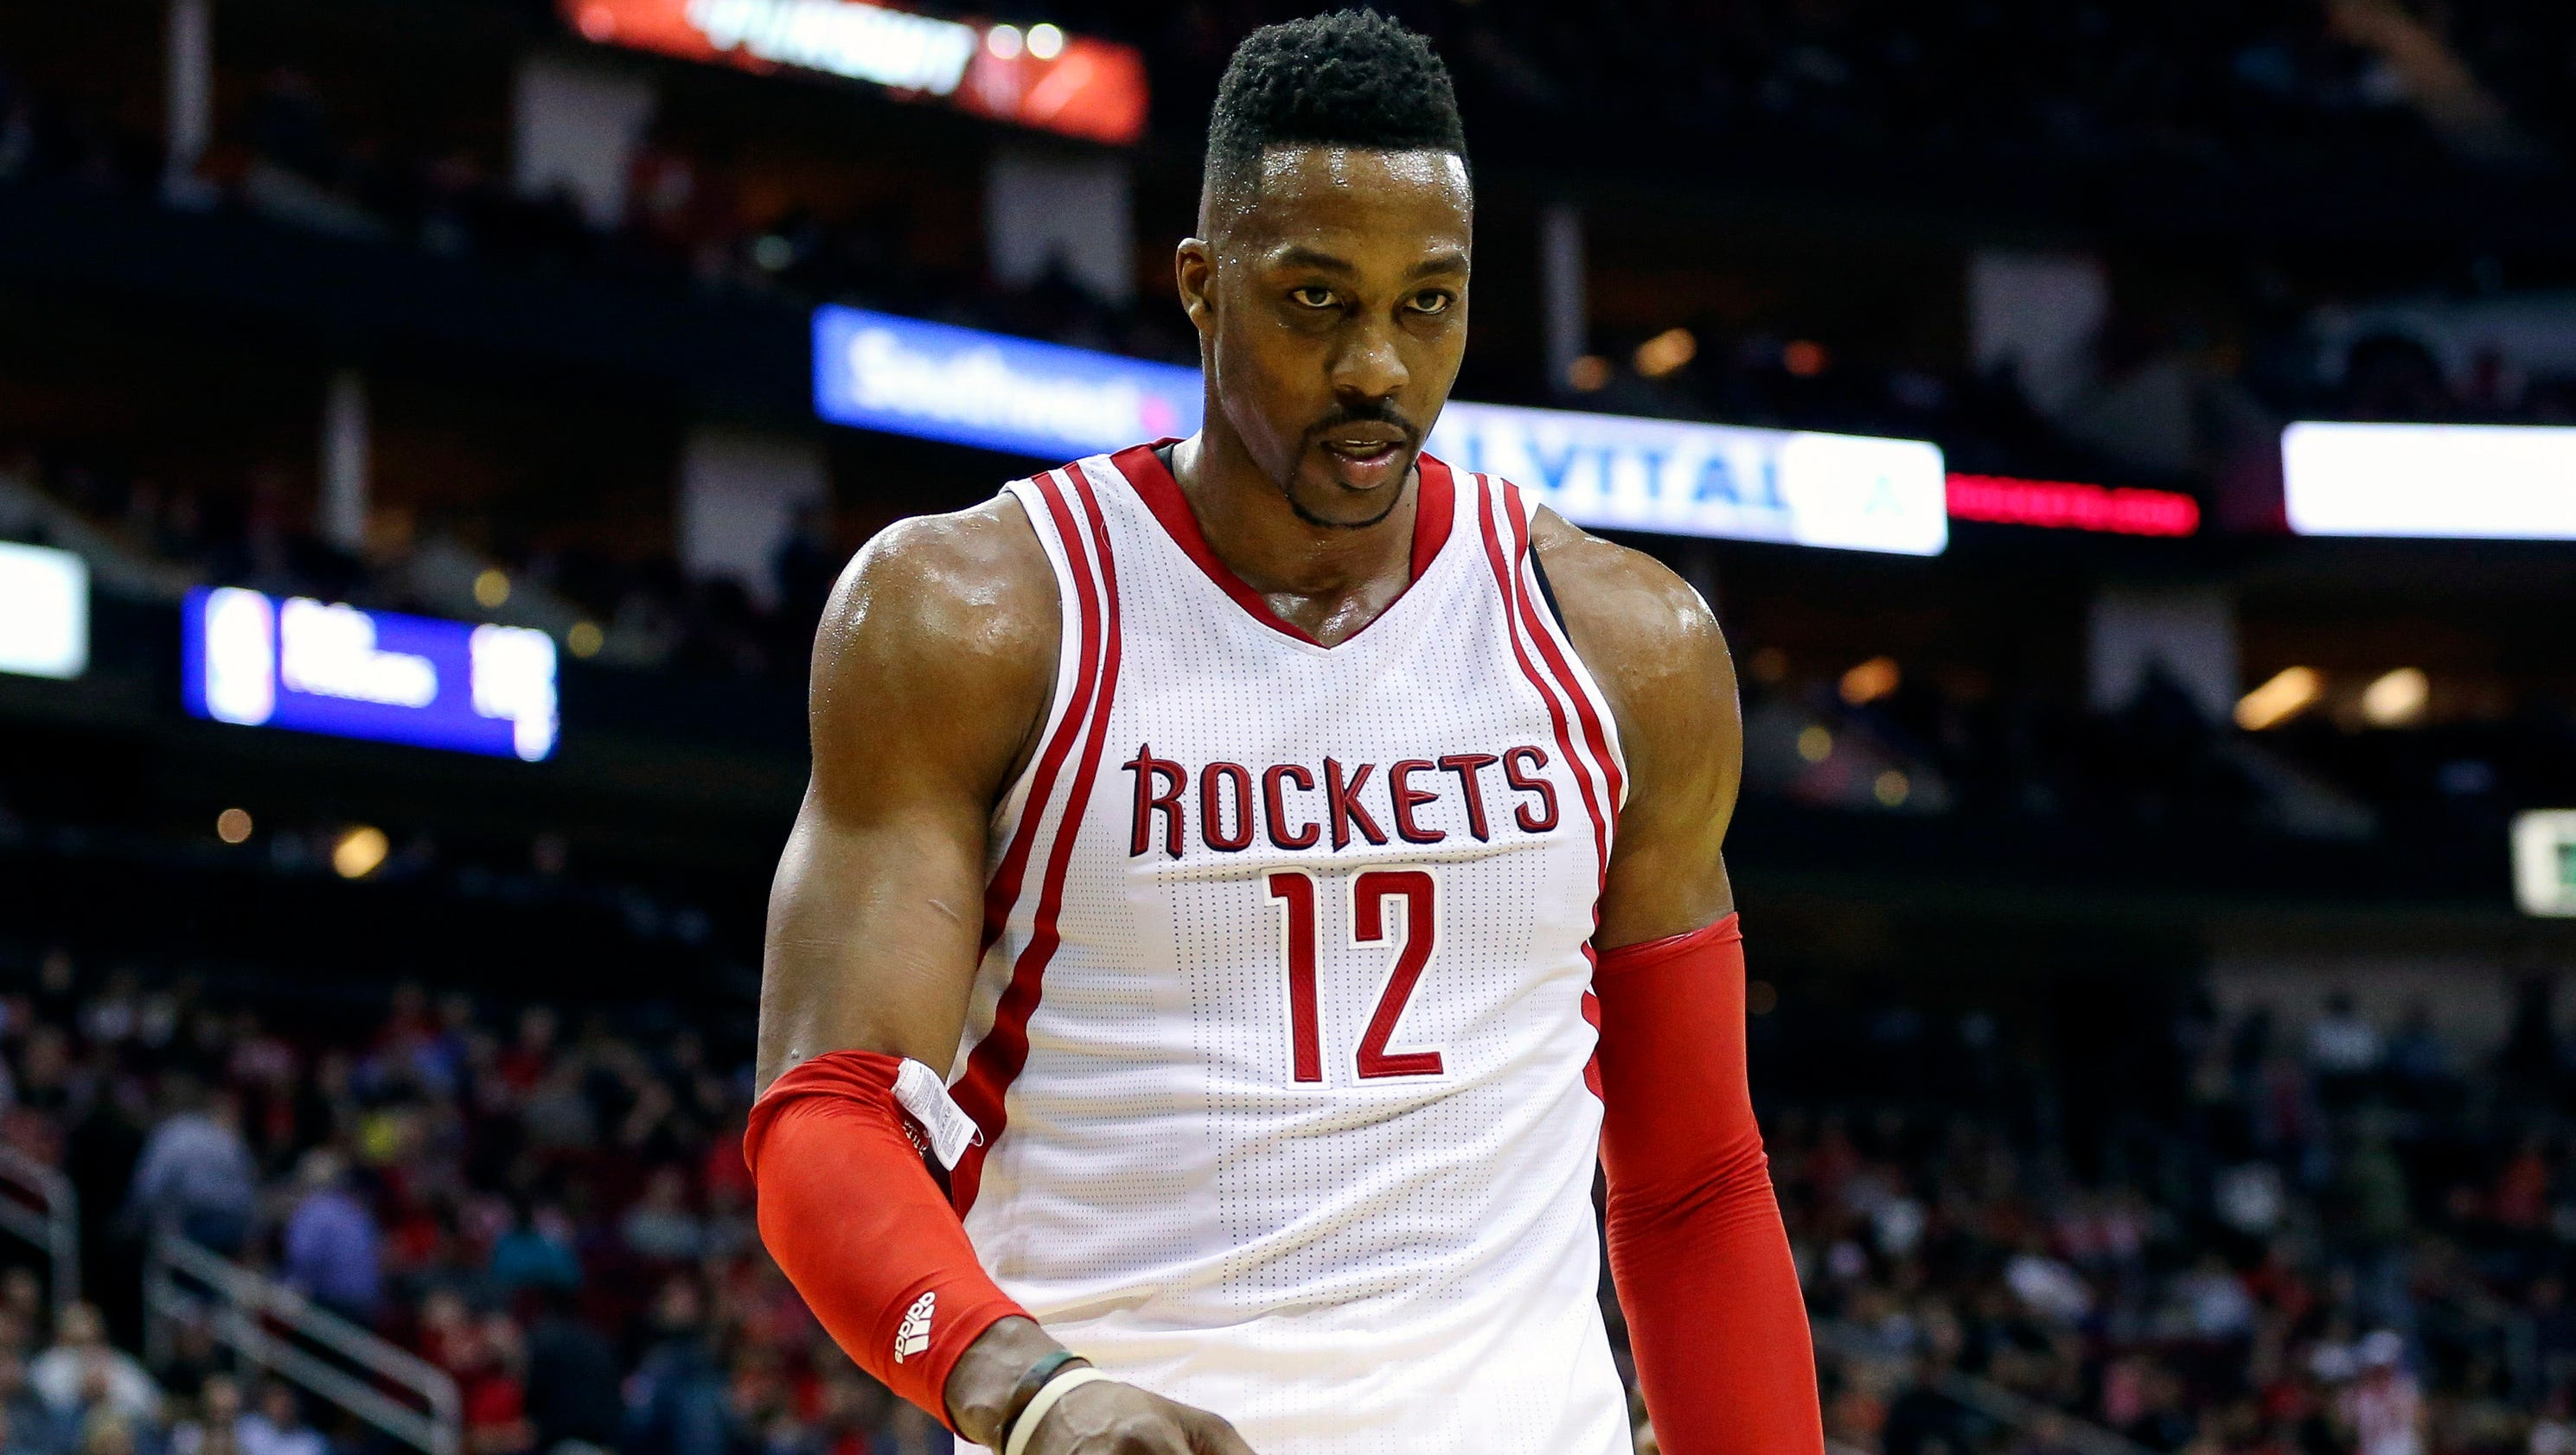 With Dwight Howard available, should Rockets move him?